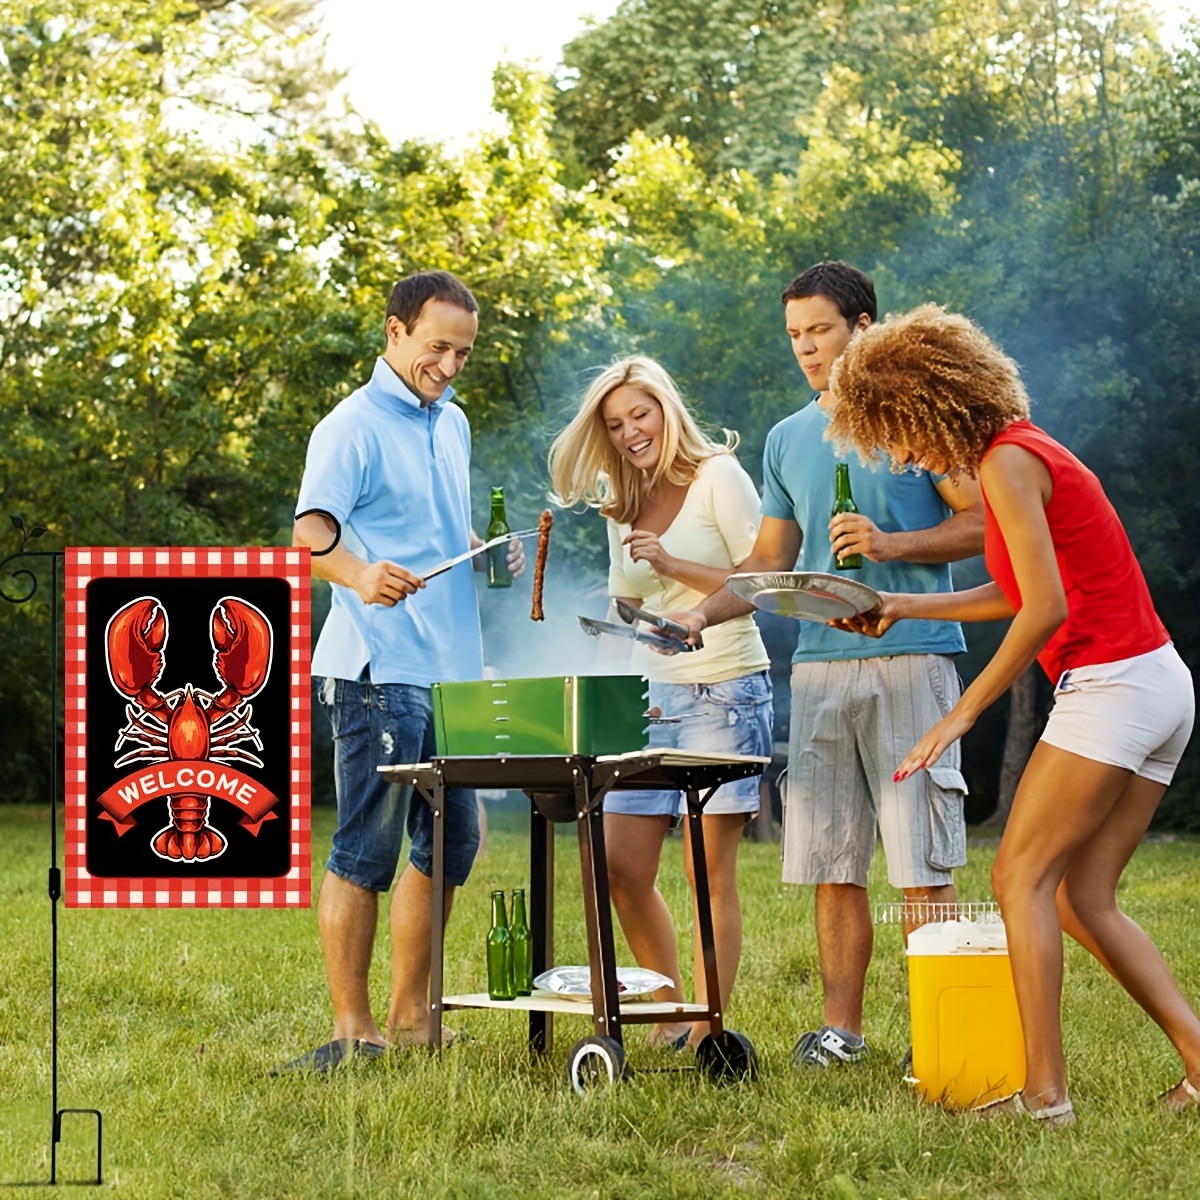 crayfish control for the lawn, yard and garden